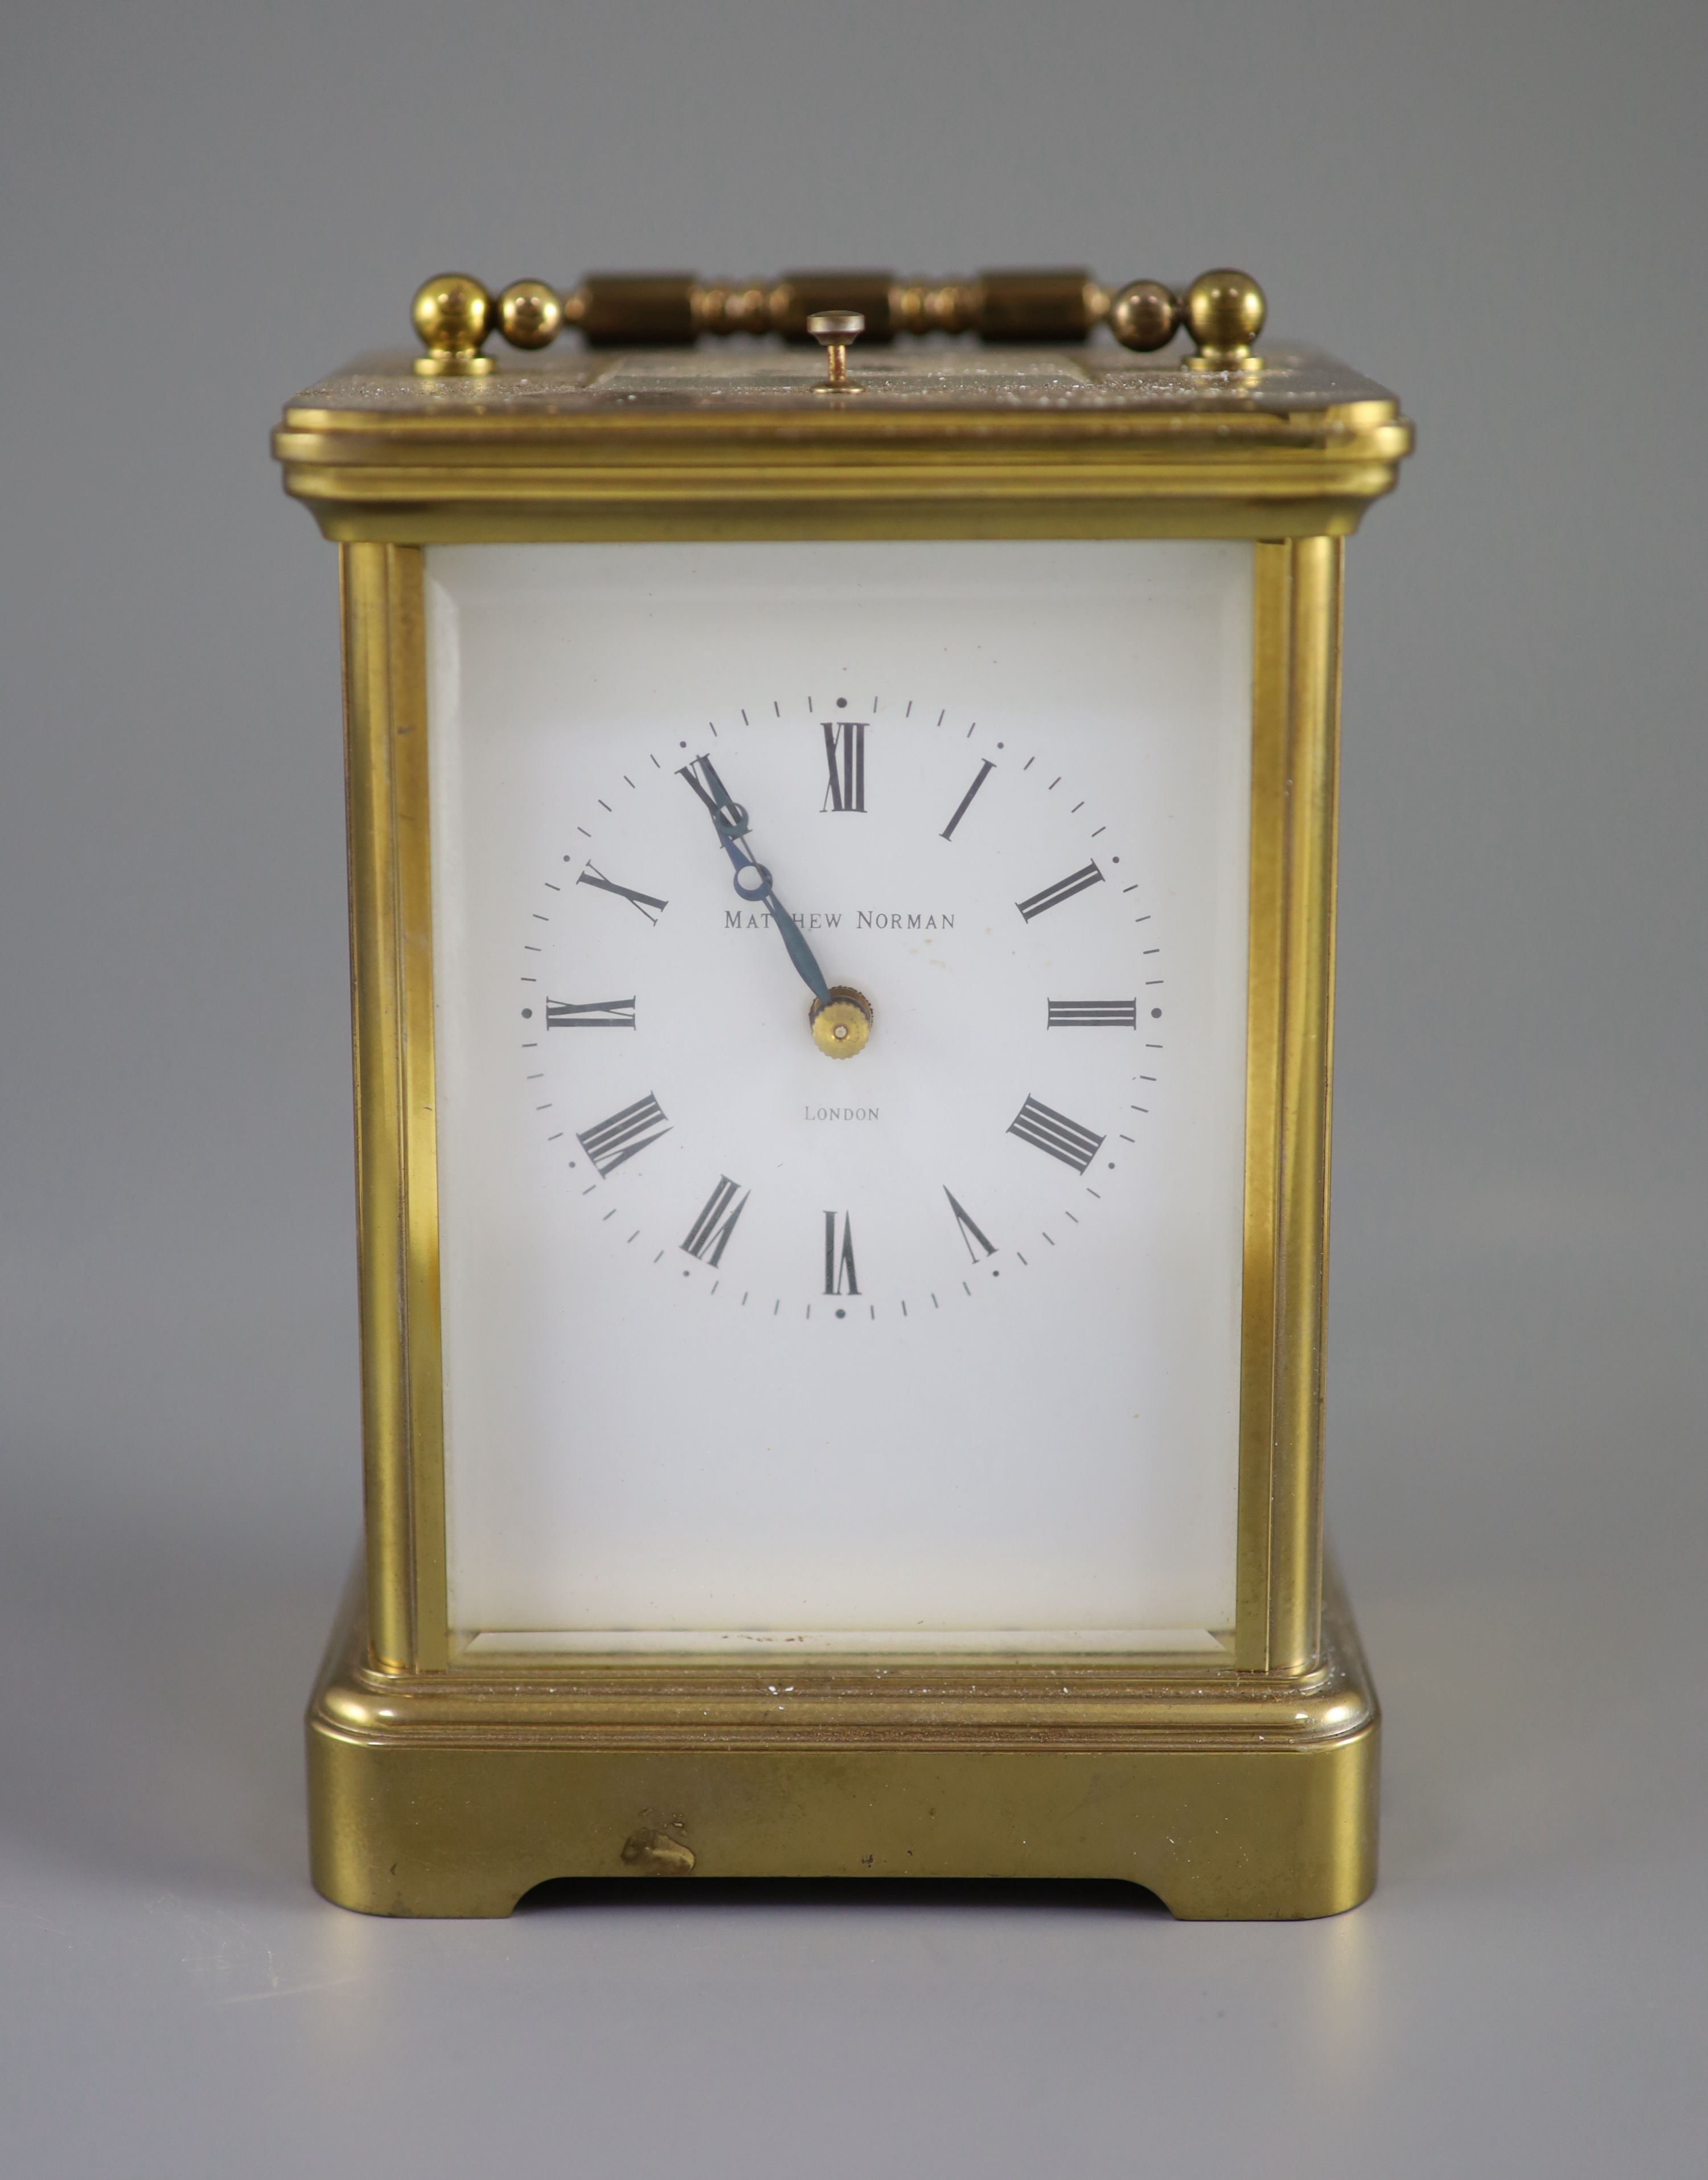 A large Swiss-made brass carriage clock, Matthew Norman, London, 20th centuryNo 1751A, white dial - Image 2 of 5